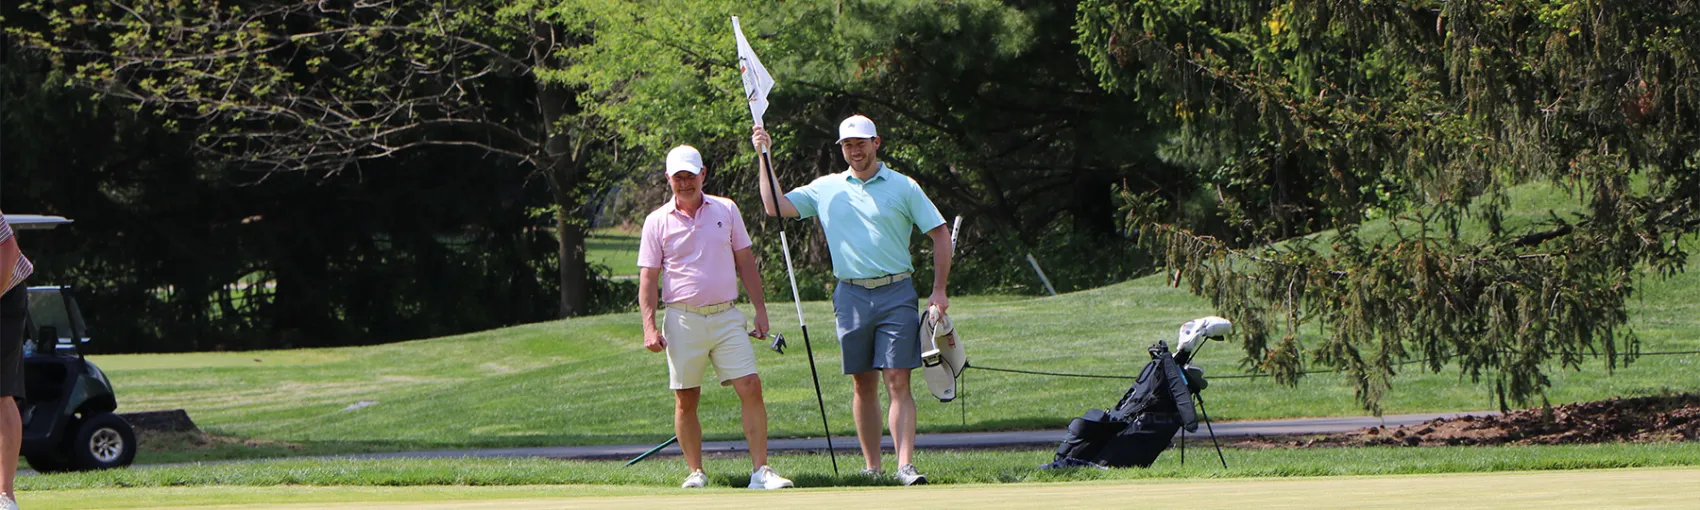 Ten Advance in Final Four-Ball Qualifier at The Legacy Club